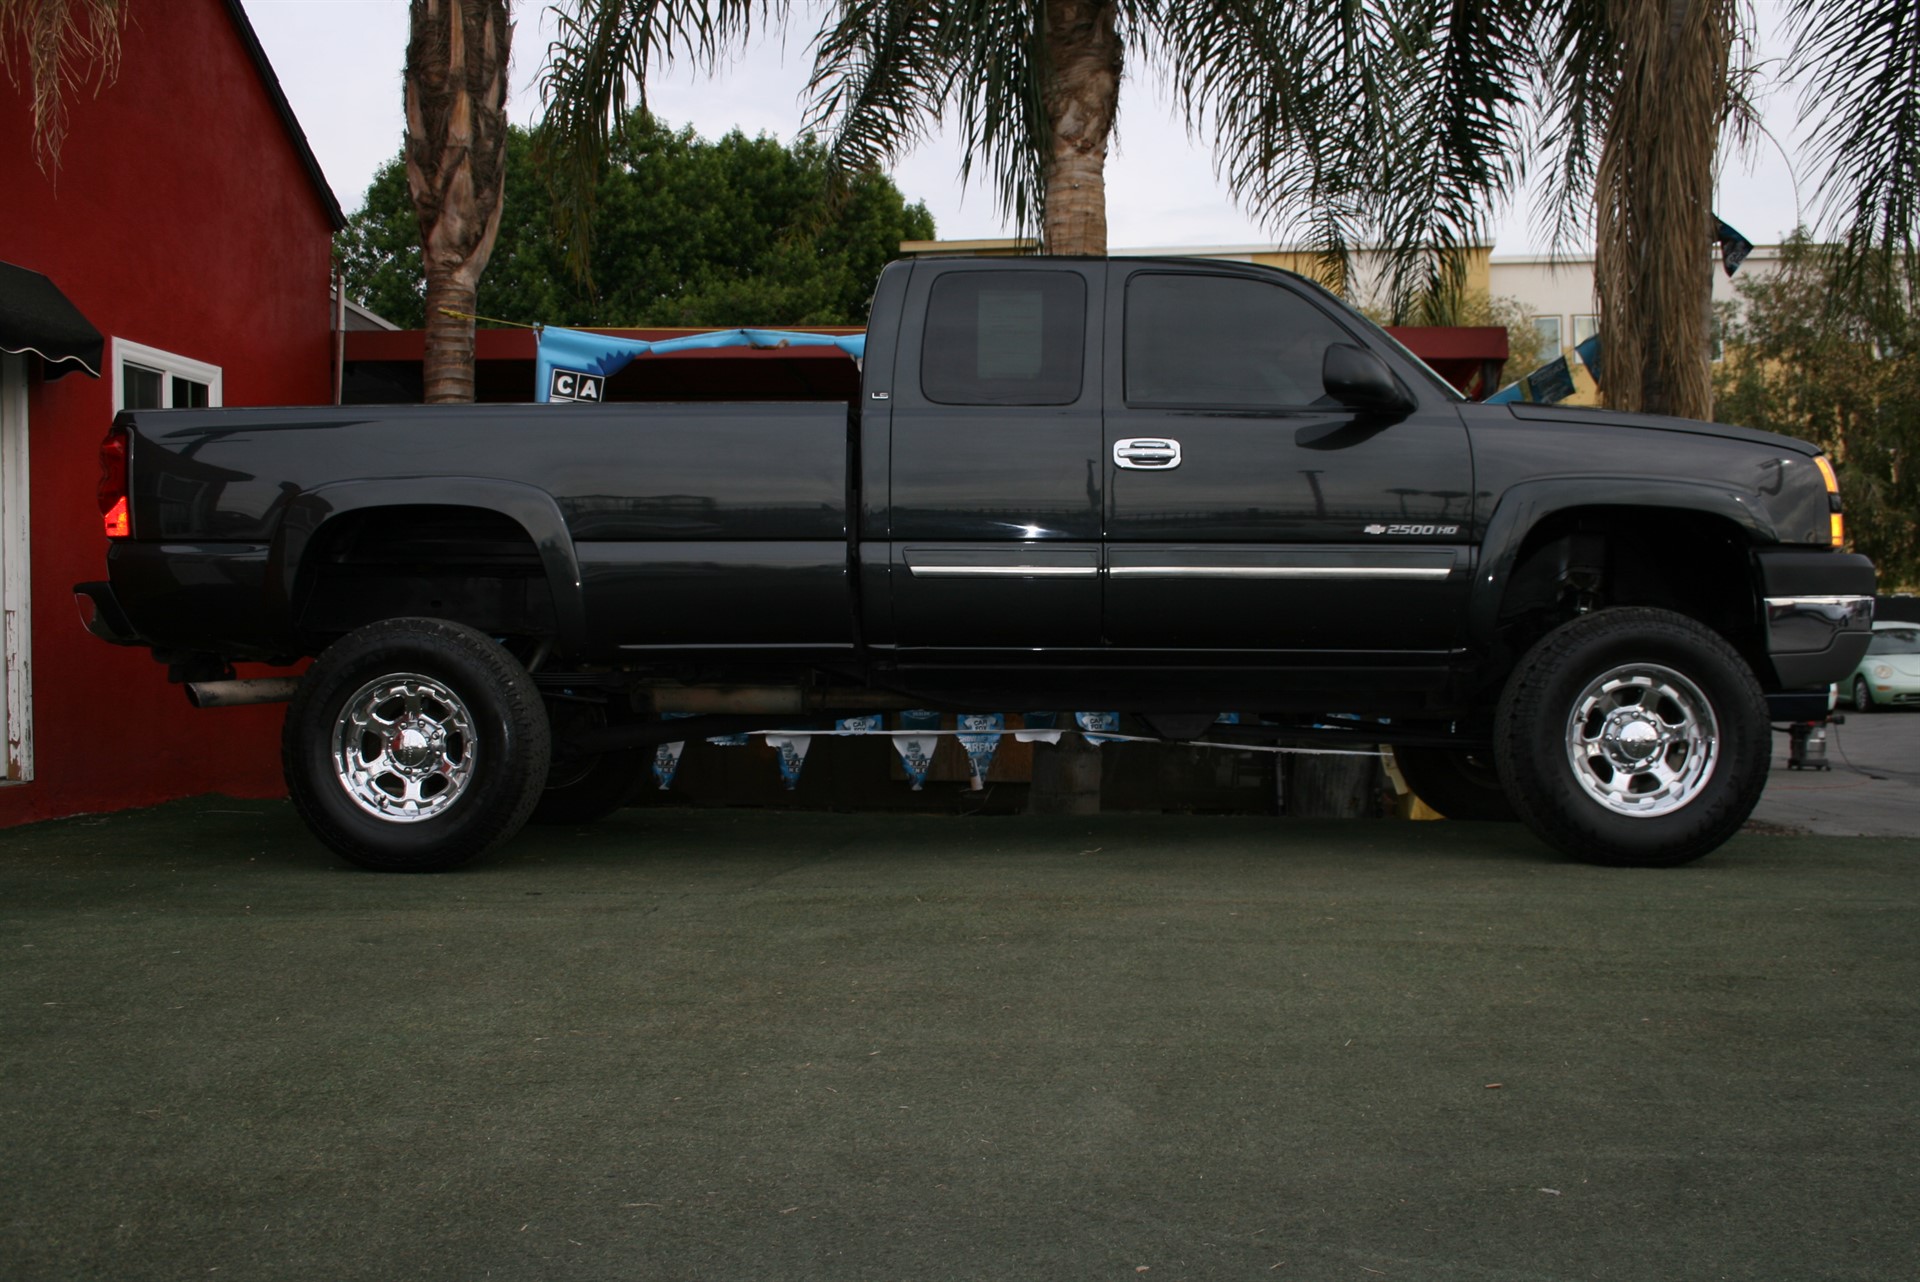 2005 Chevy Silverado 2500HD- Lifted with Big Tires! Very Powerful!